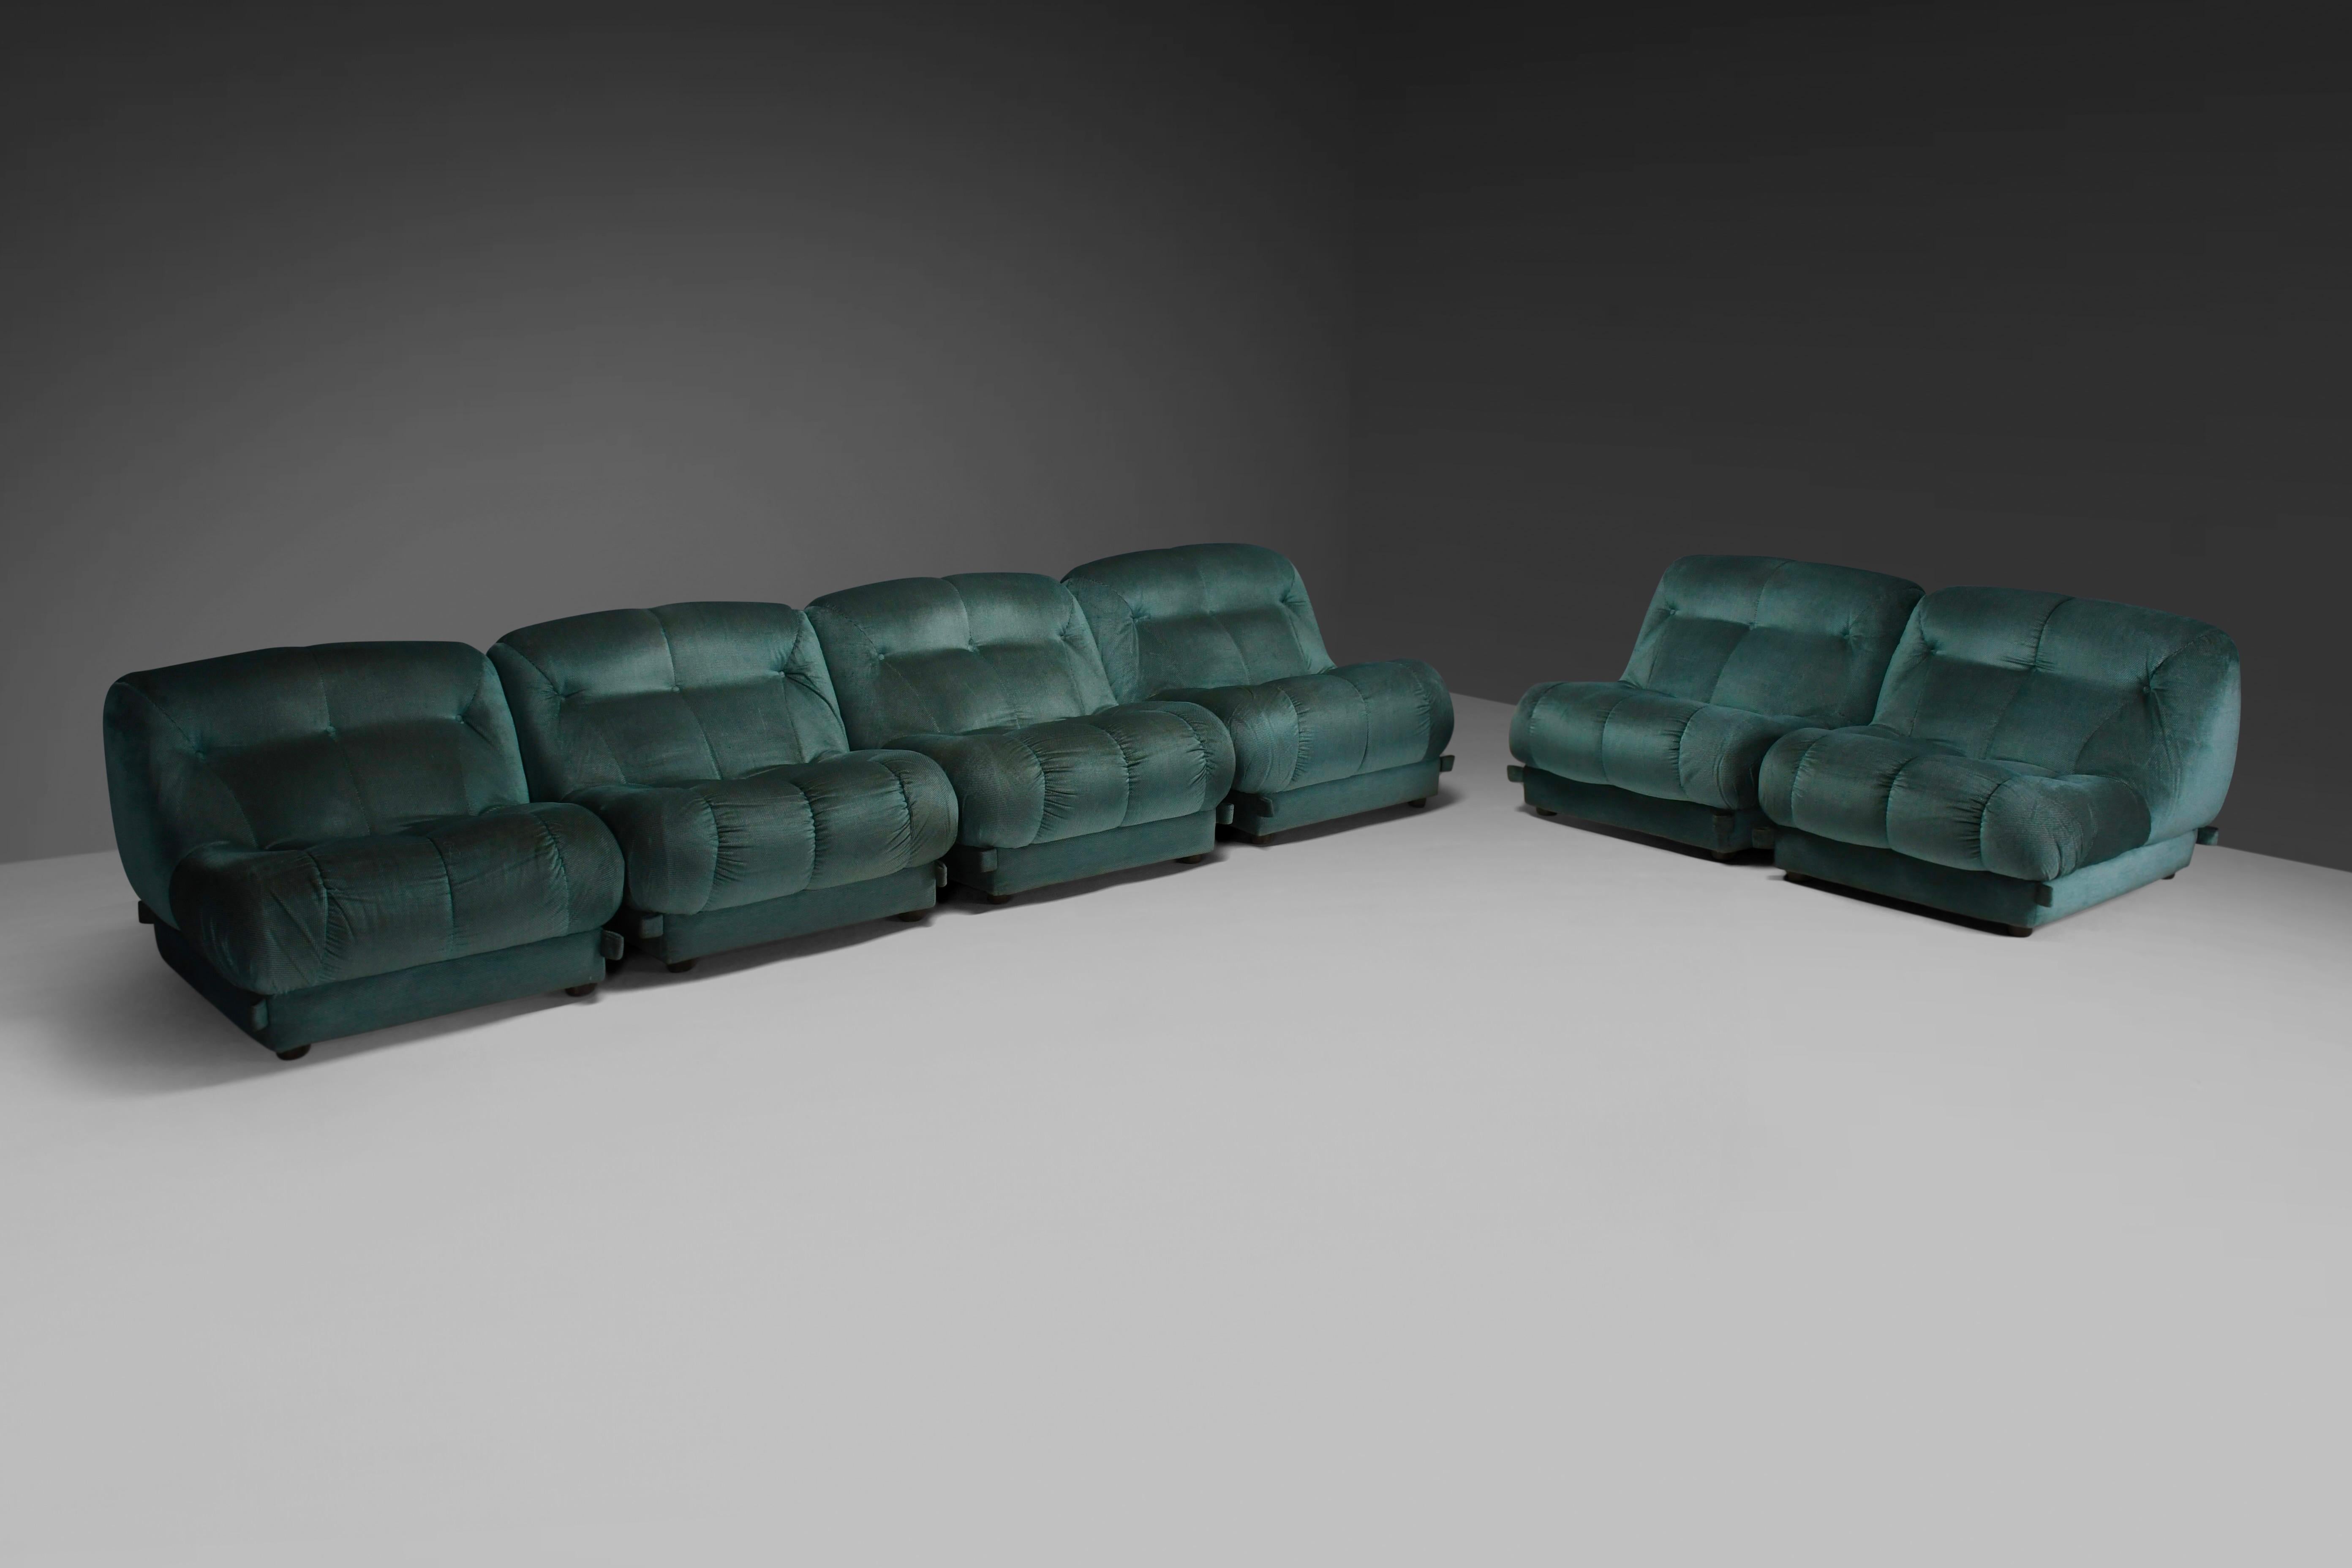 Large Modular Sectional ‘Nuvolone’ Sofa by Rino Maturi in Green Fabric, 1970s For Sale 2